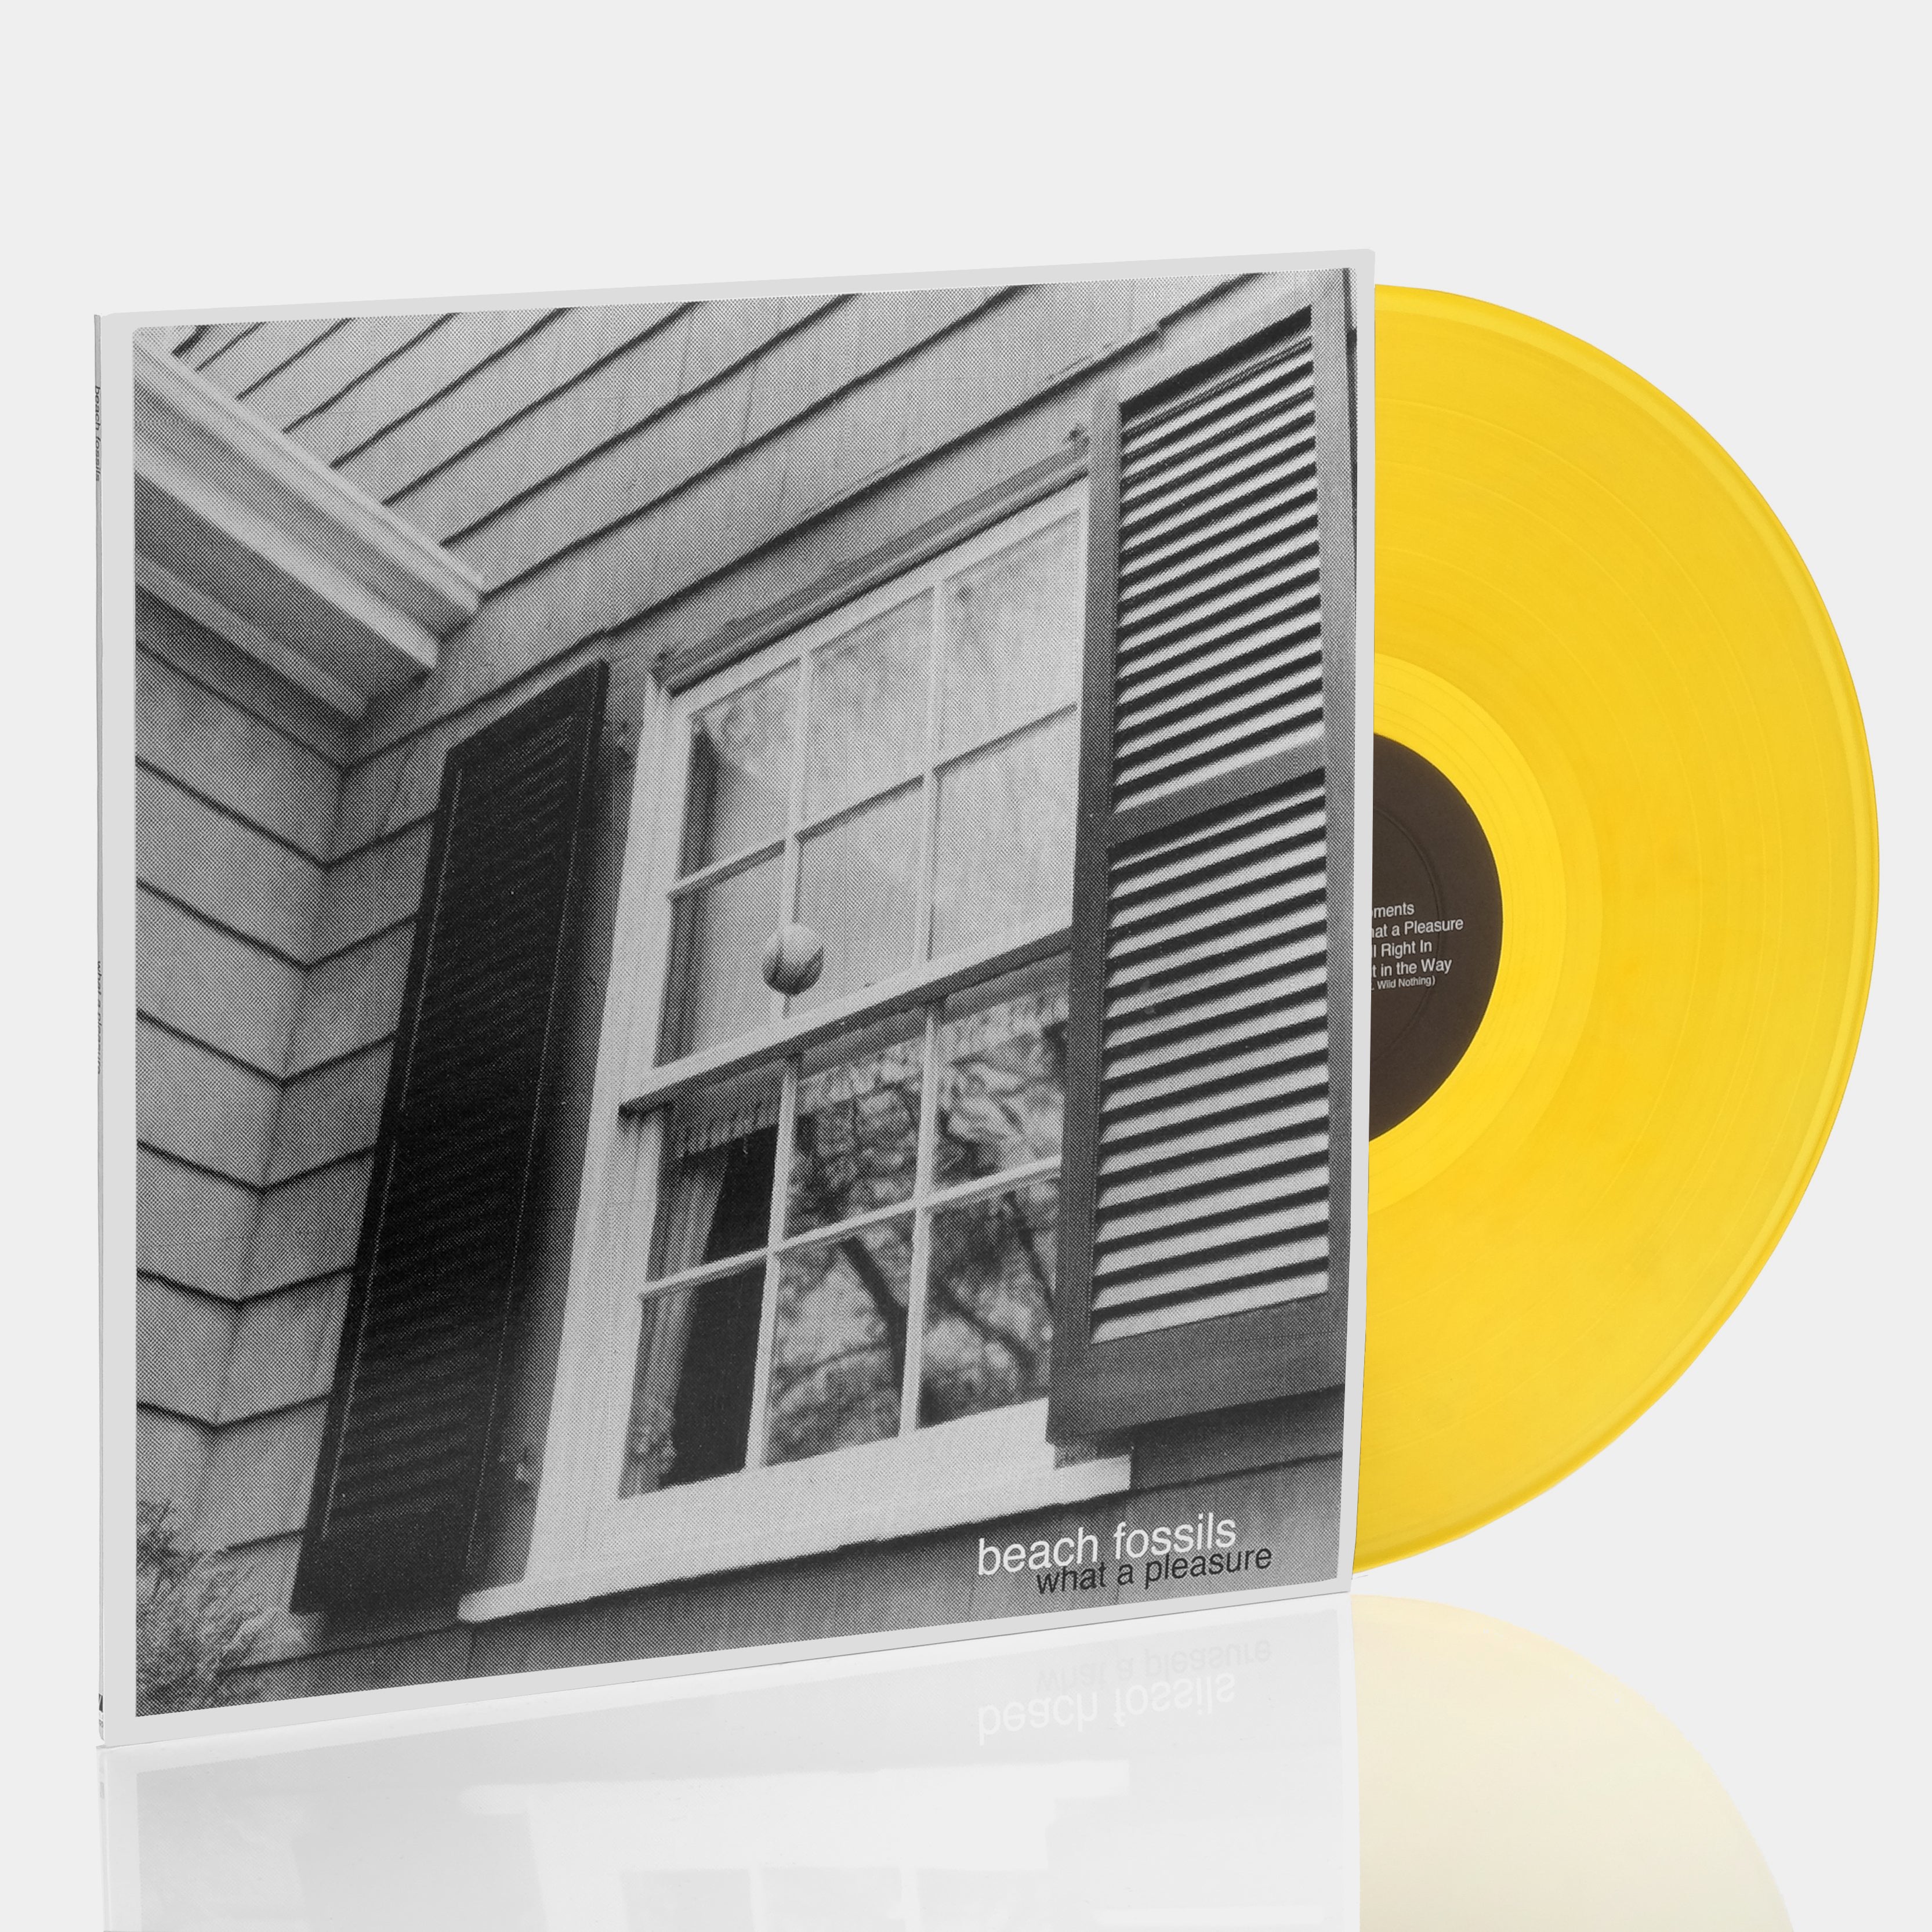 Beach Fossils - What A Pleasure (Limited Edition) LP Yellow Vinyl Record